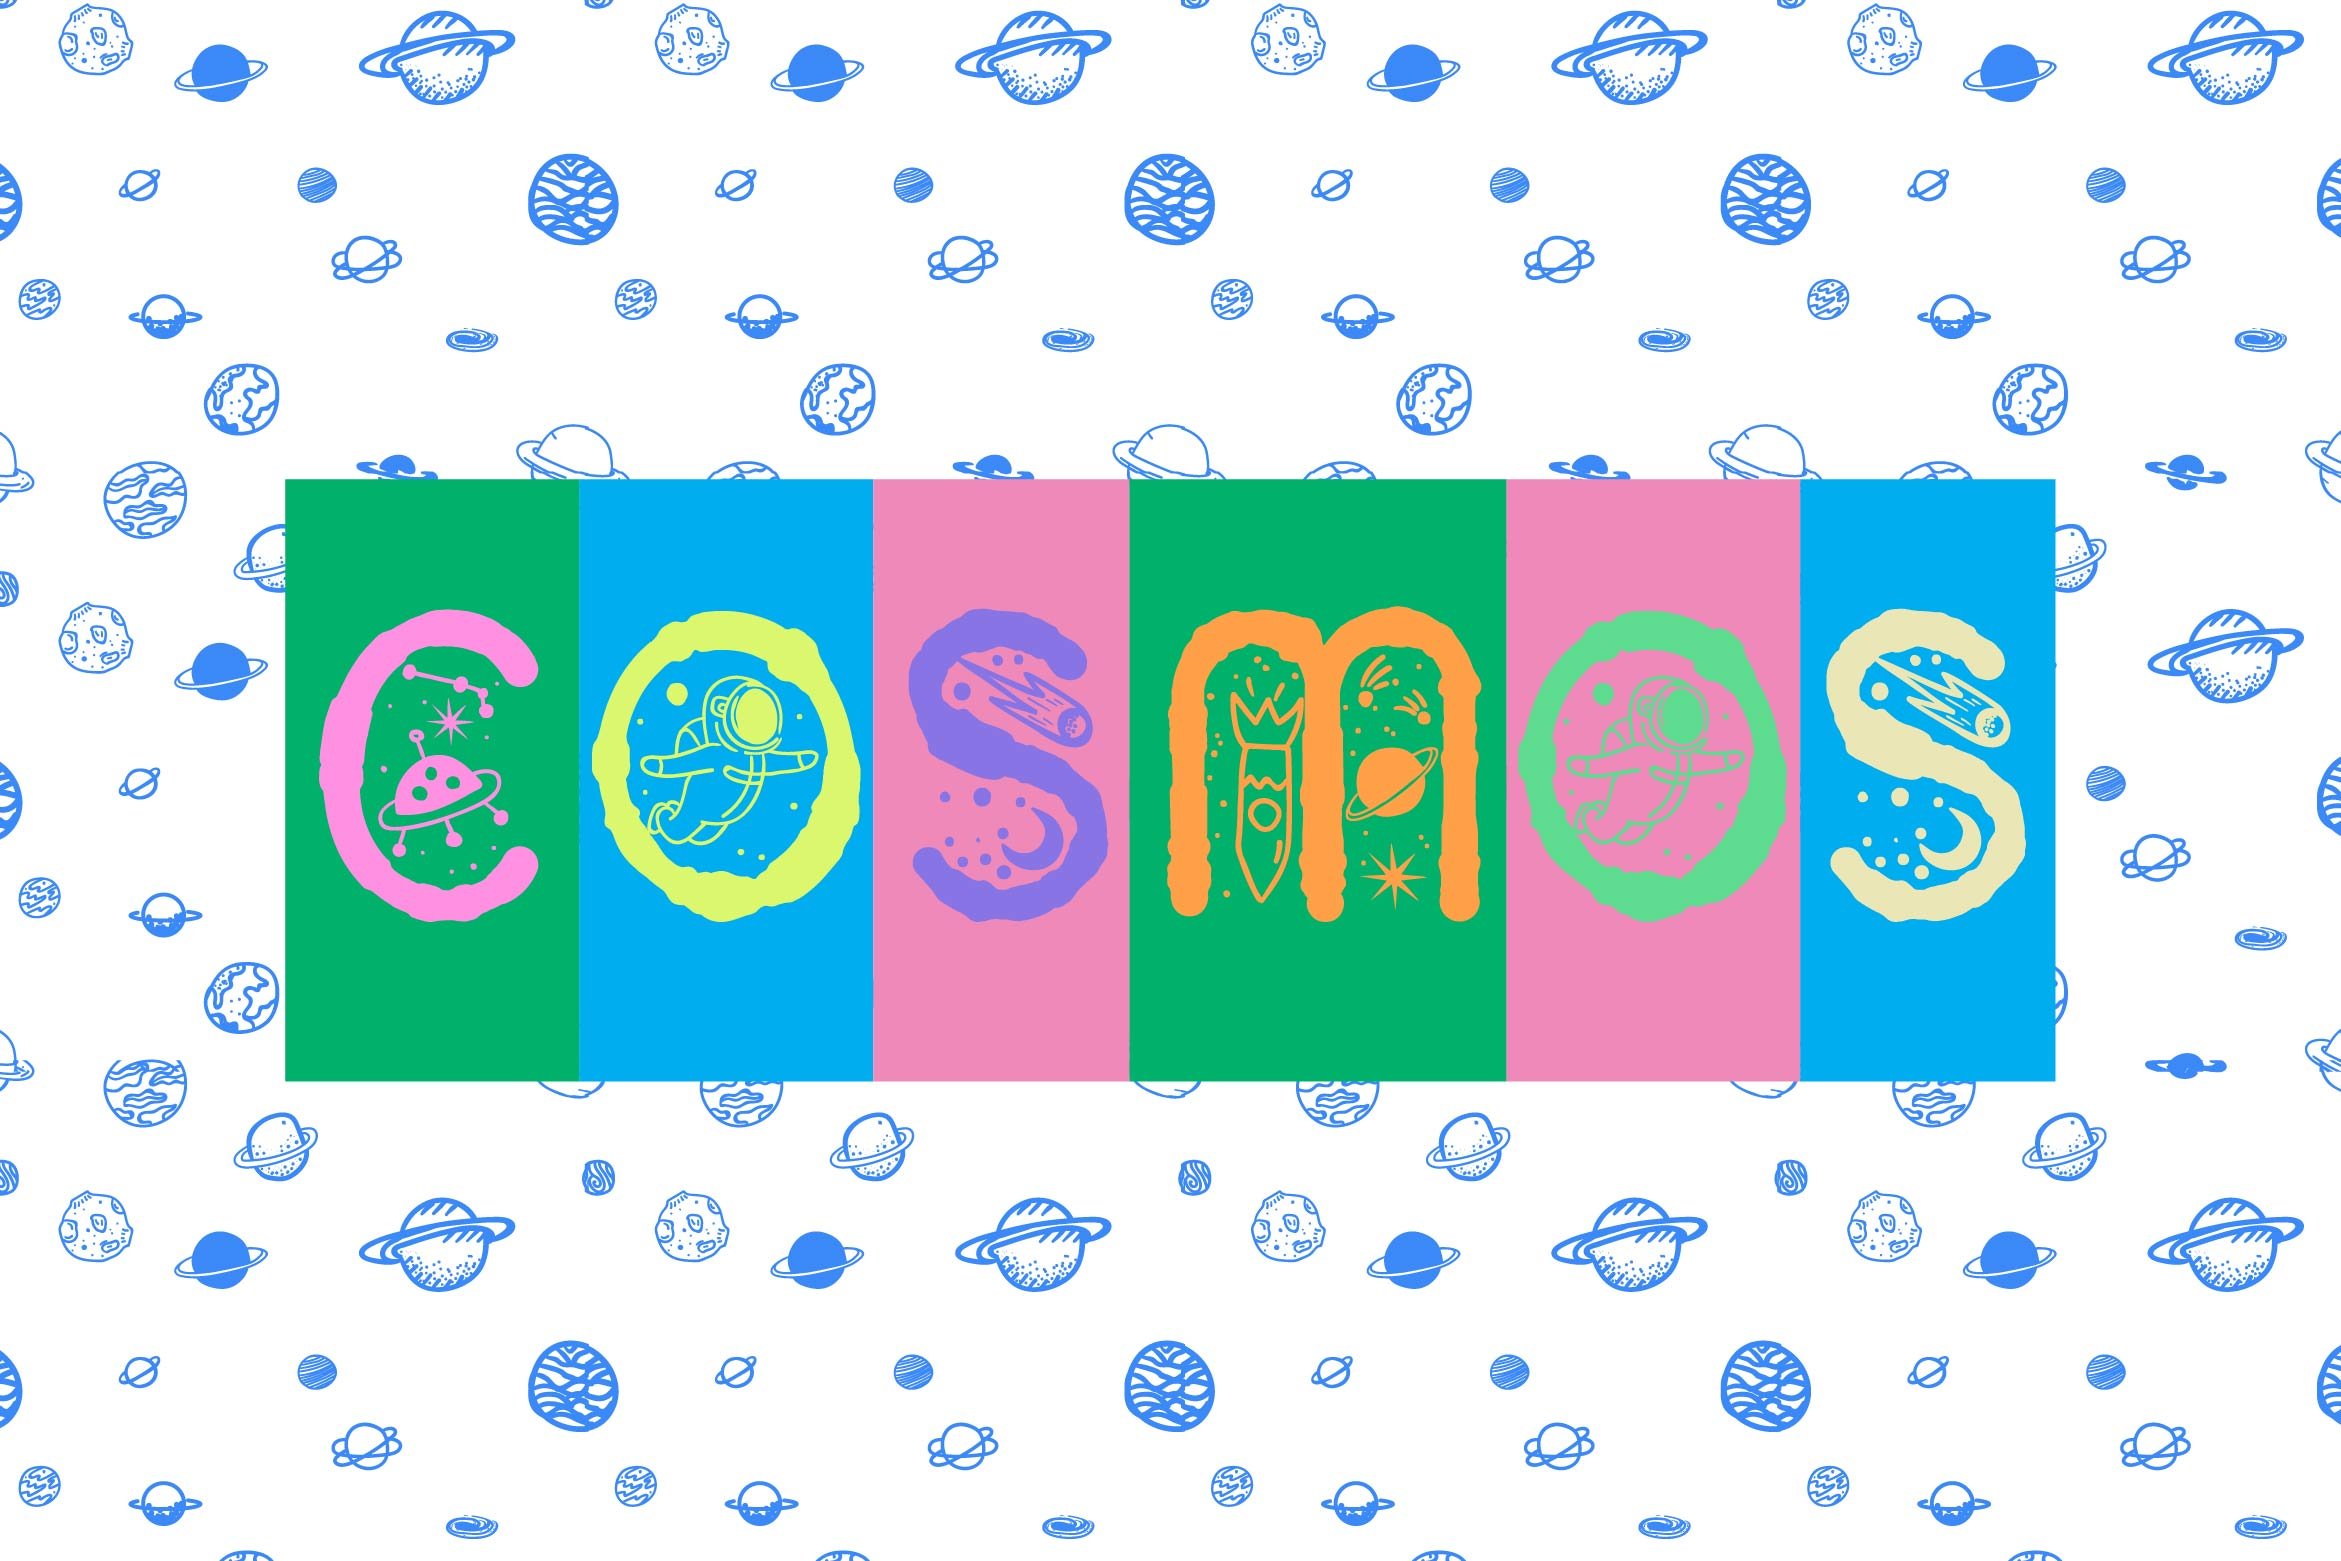 Cosmos font and seamless pattern preview image.